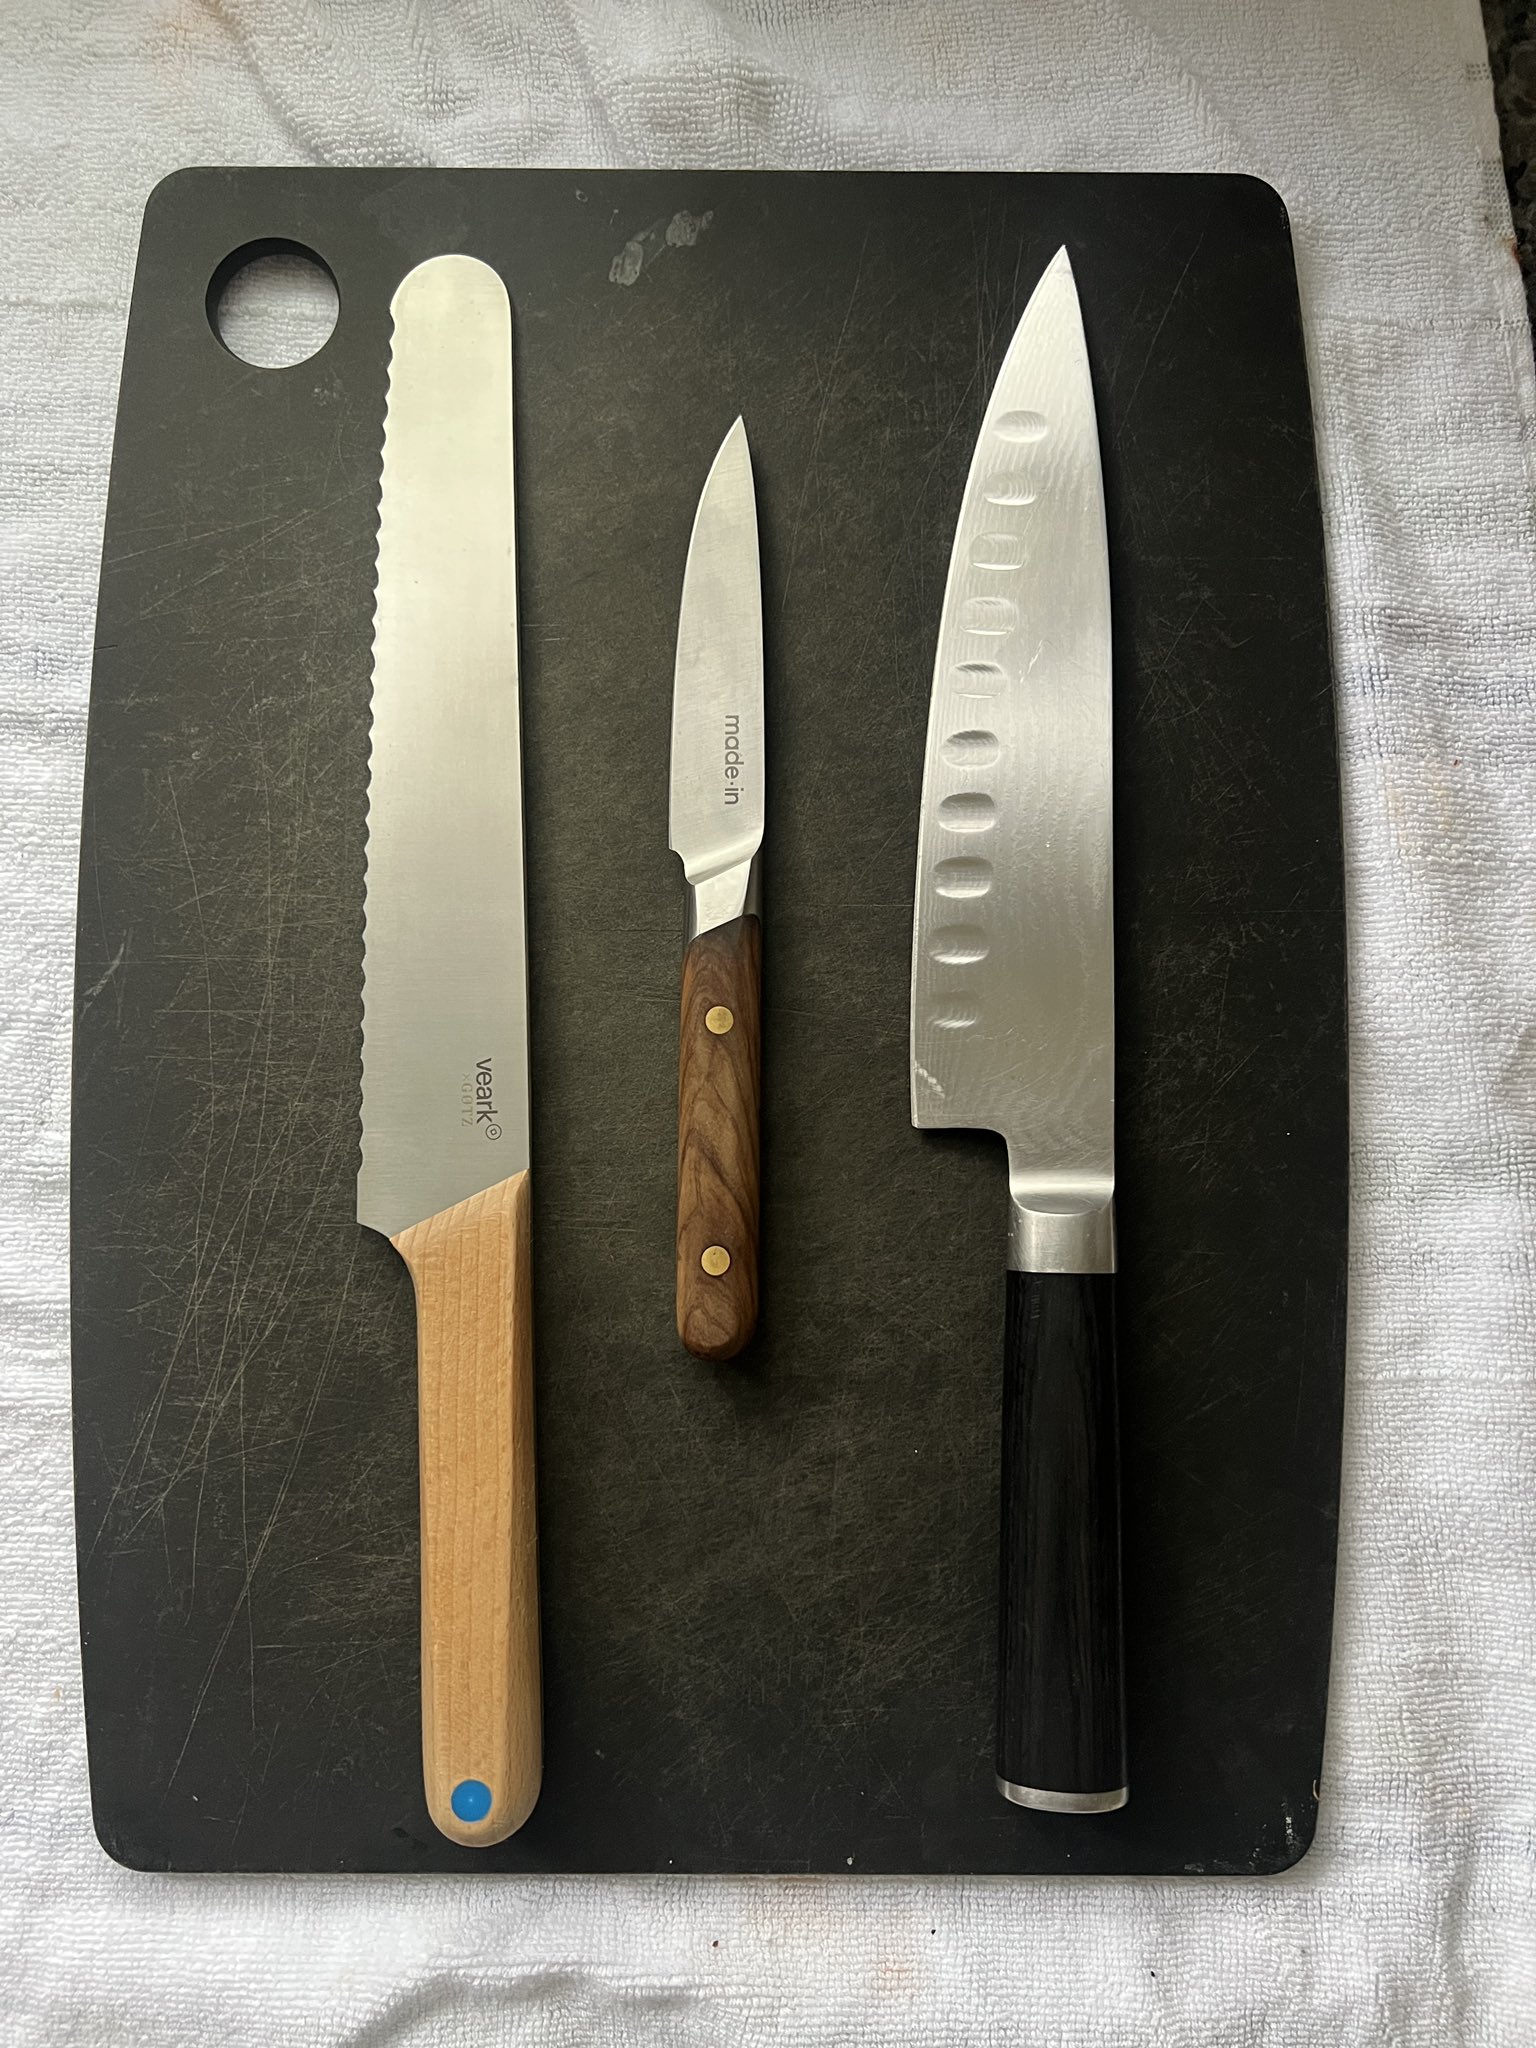 Myles Snider on X: I don't recommend knife sets. They're usually